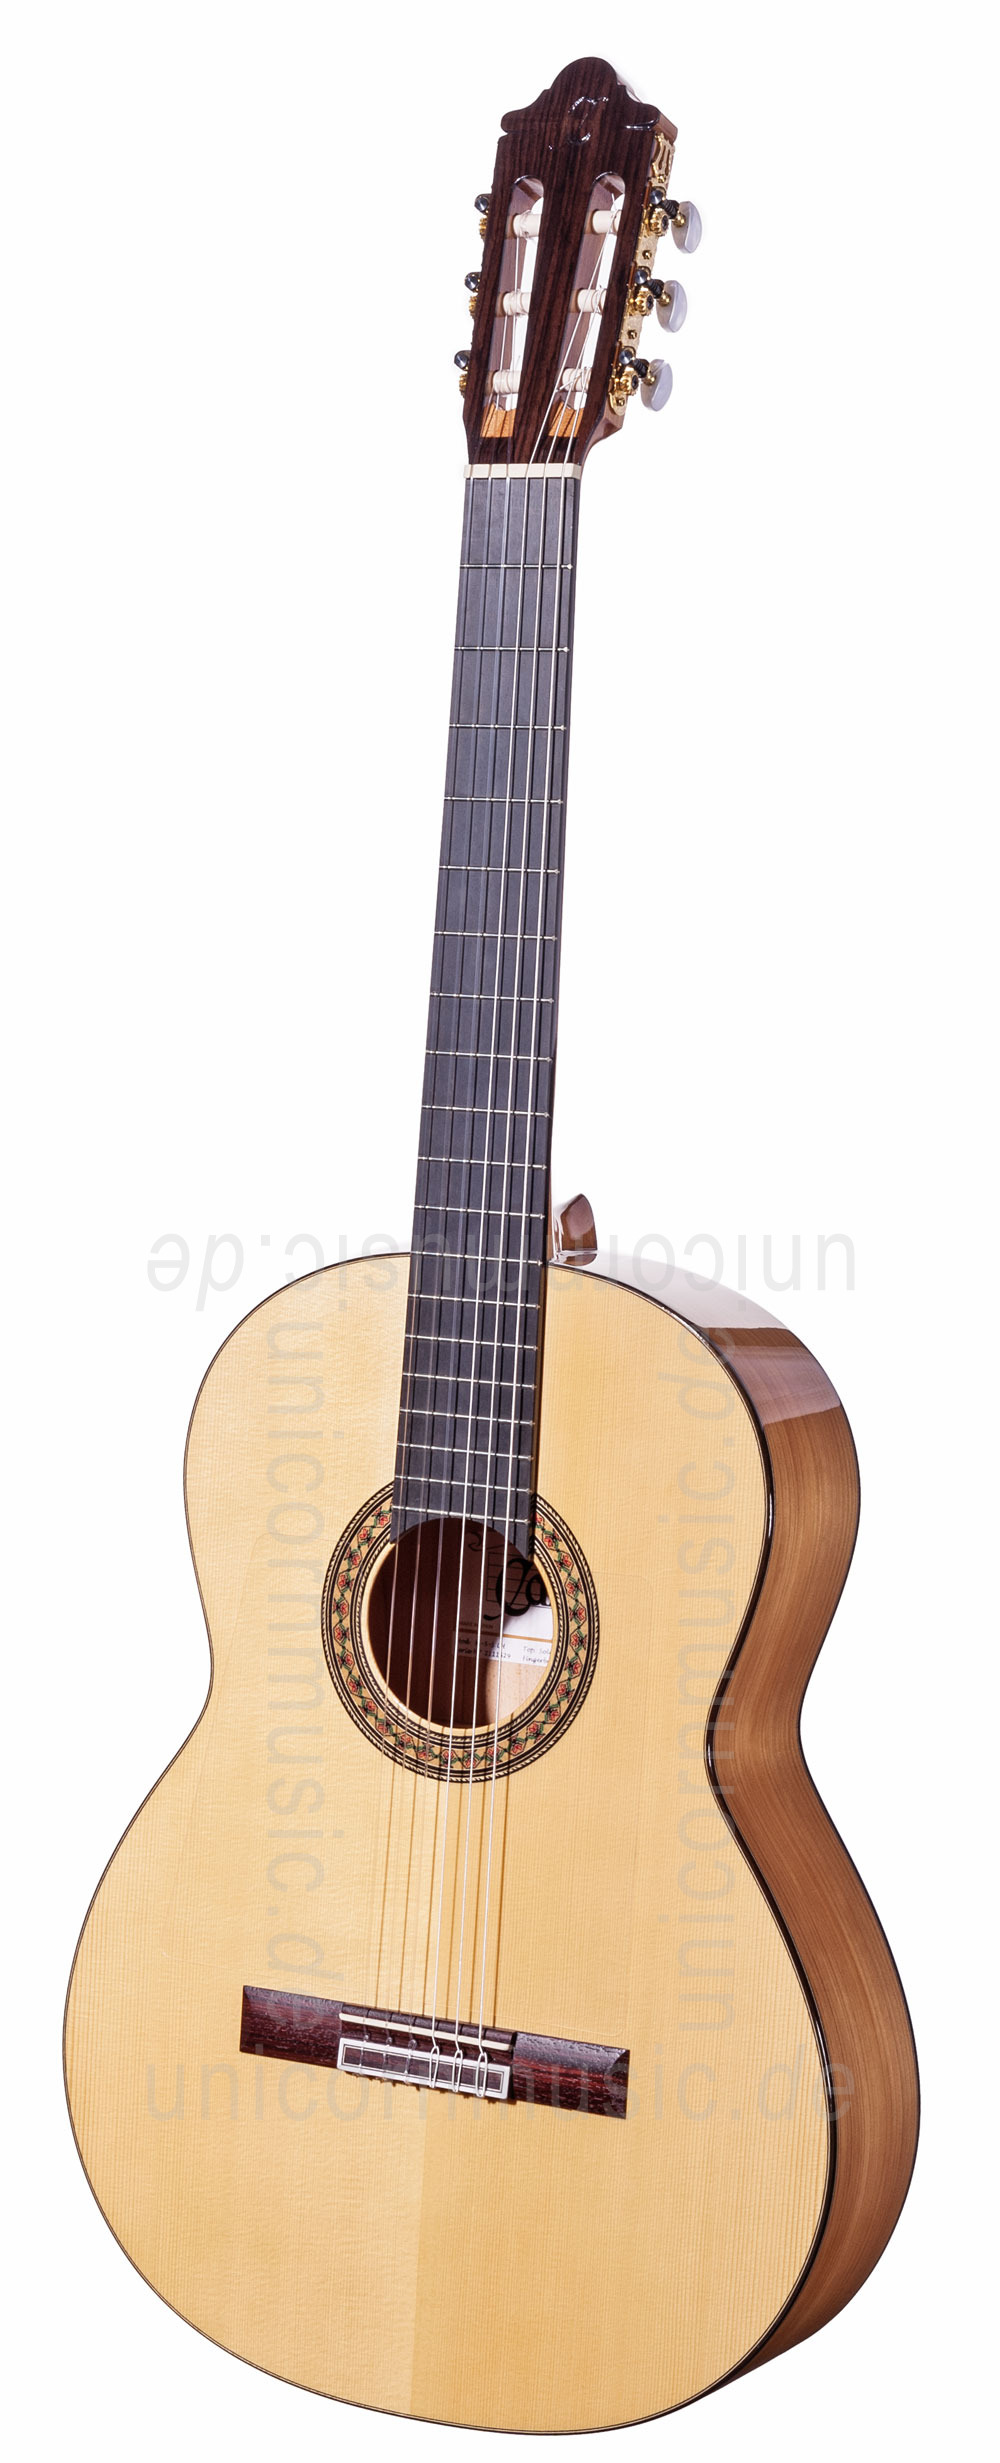 to article description / price Spanish Flamenco Guitar CAMPS M5-S-LH (blanca) - left hand - solid spruce top - Sandalwood